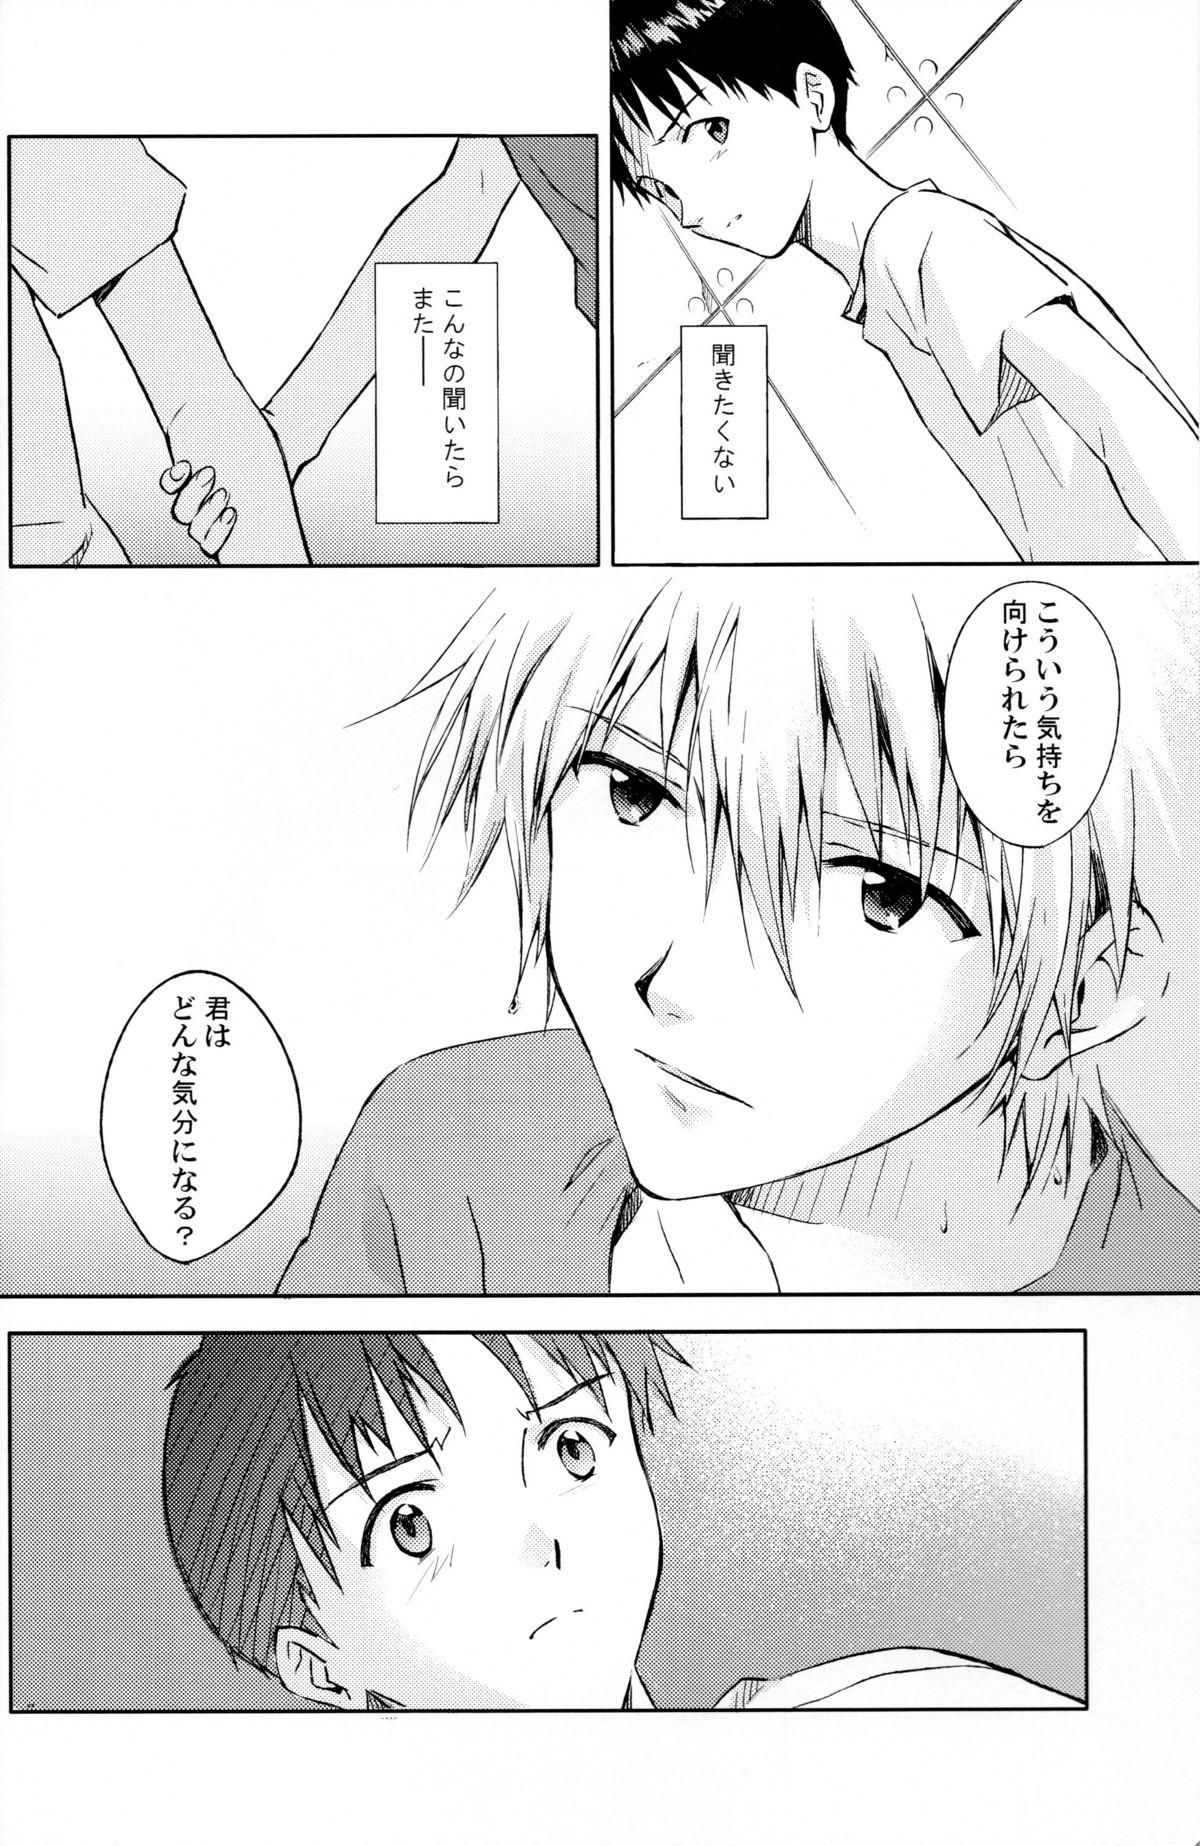 Perfect and down & down - Neon genesis evangelion Cavala - Page 10